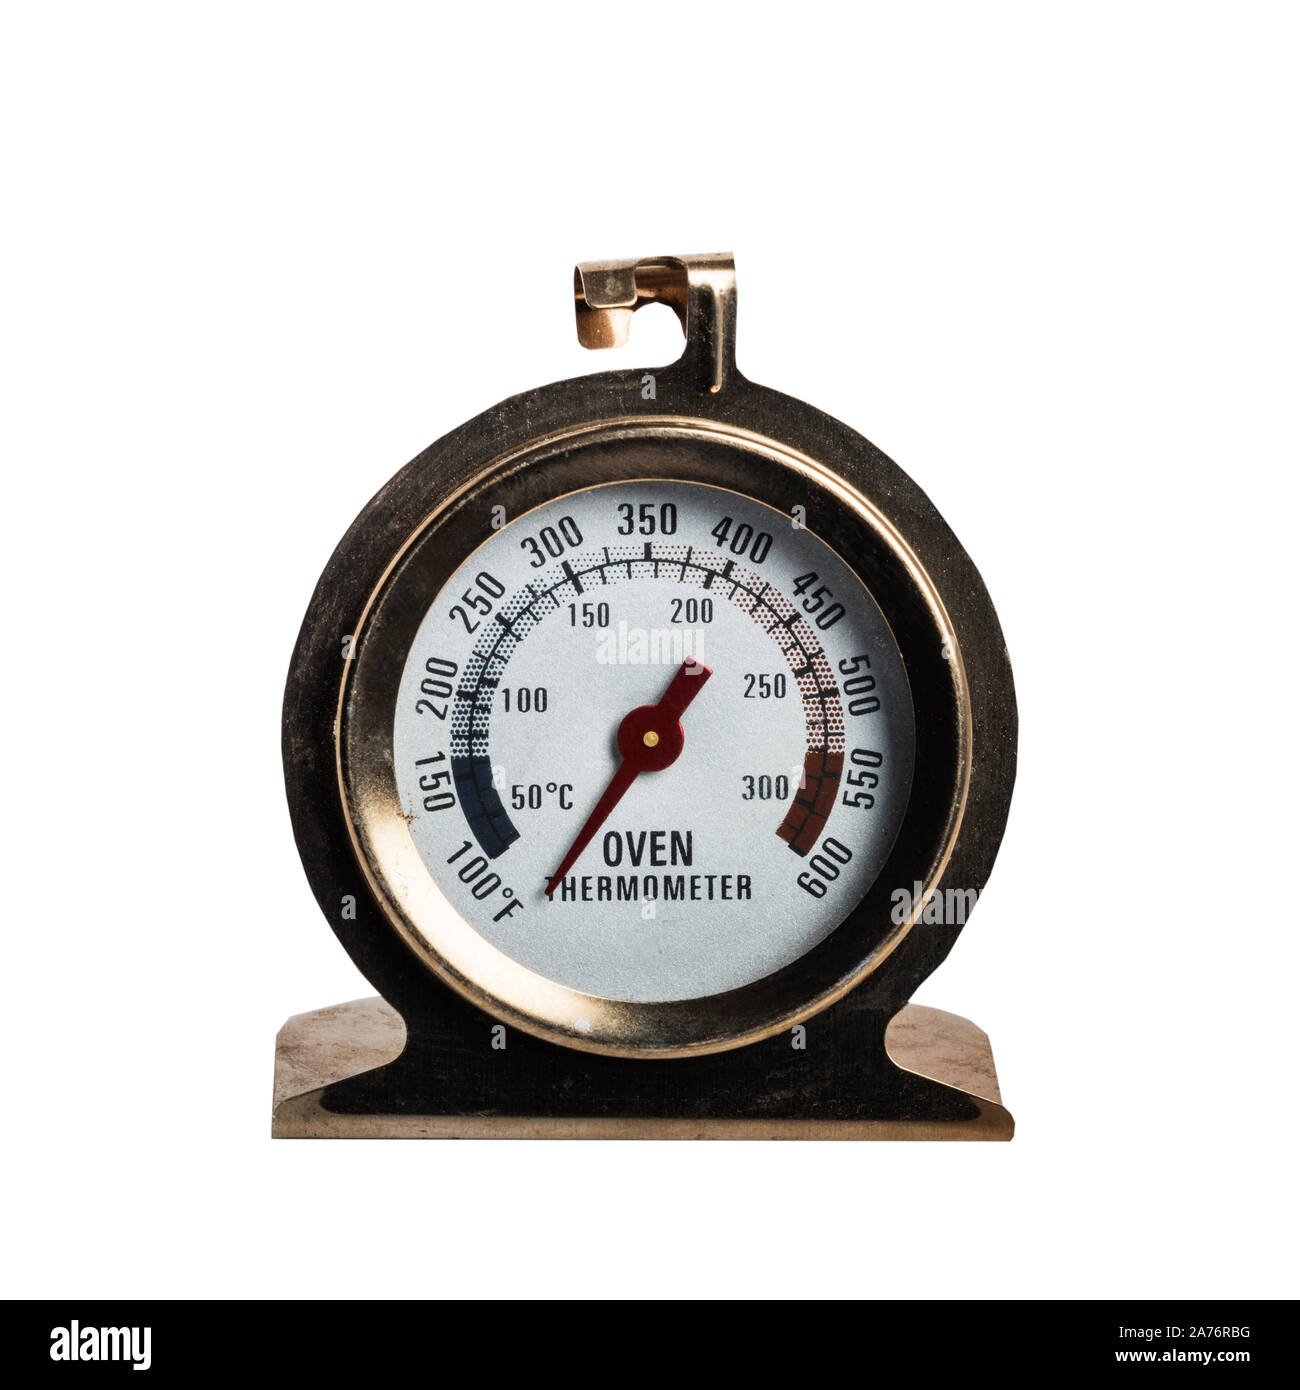 An oven thermometer on a white background Stock Photo